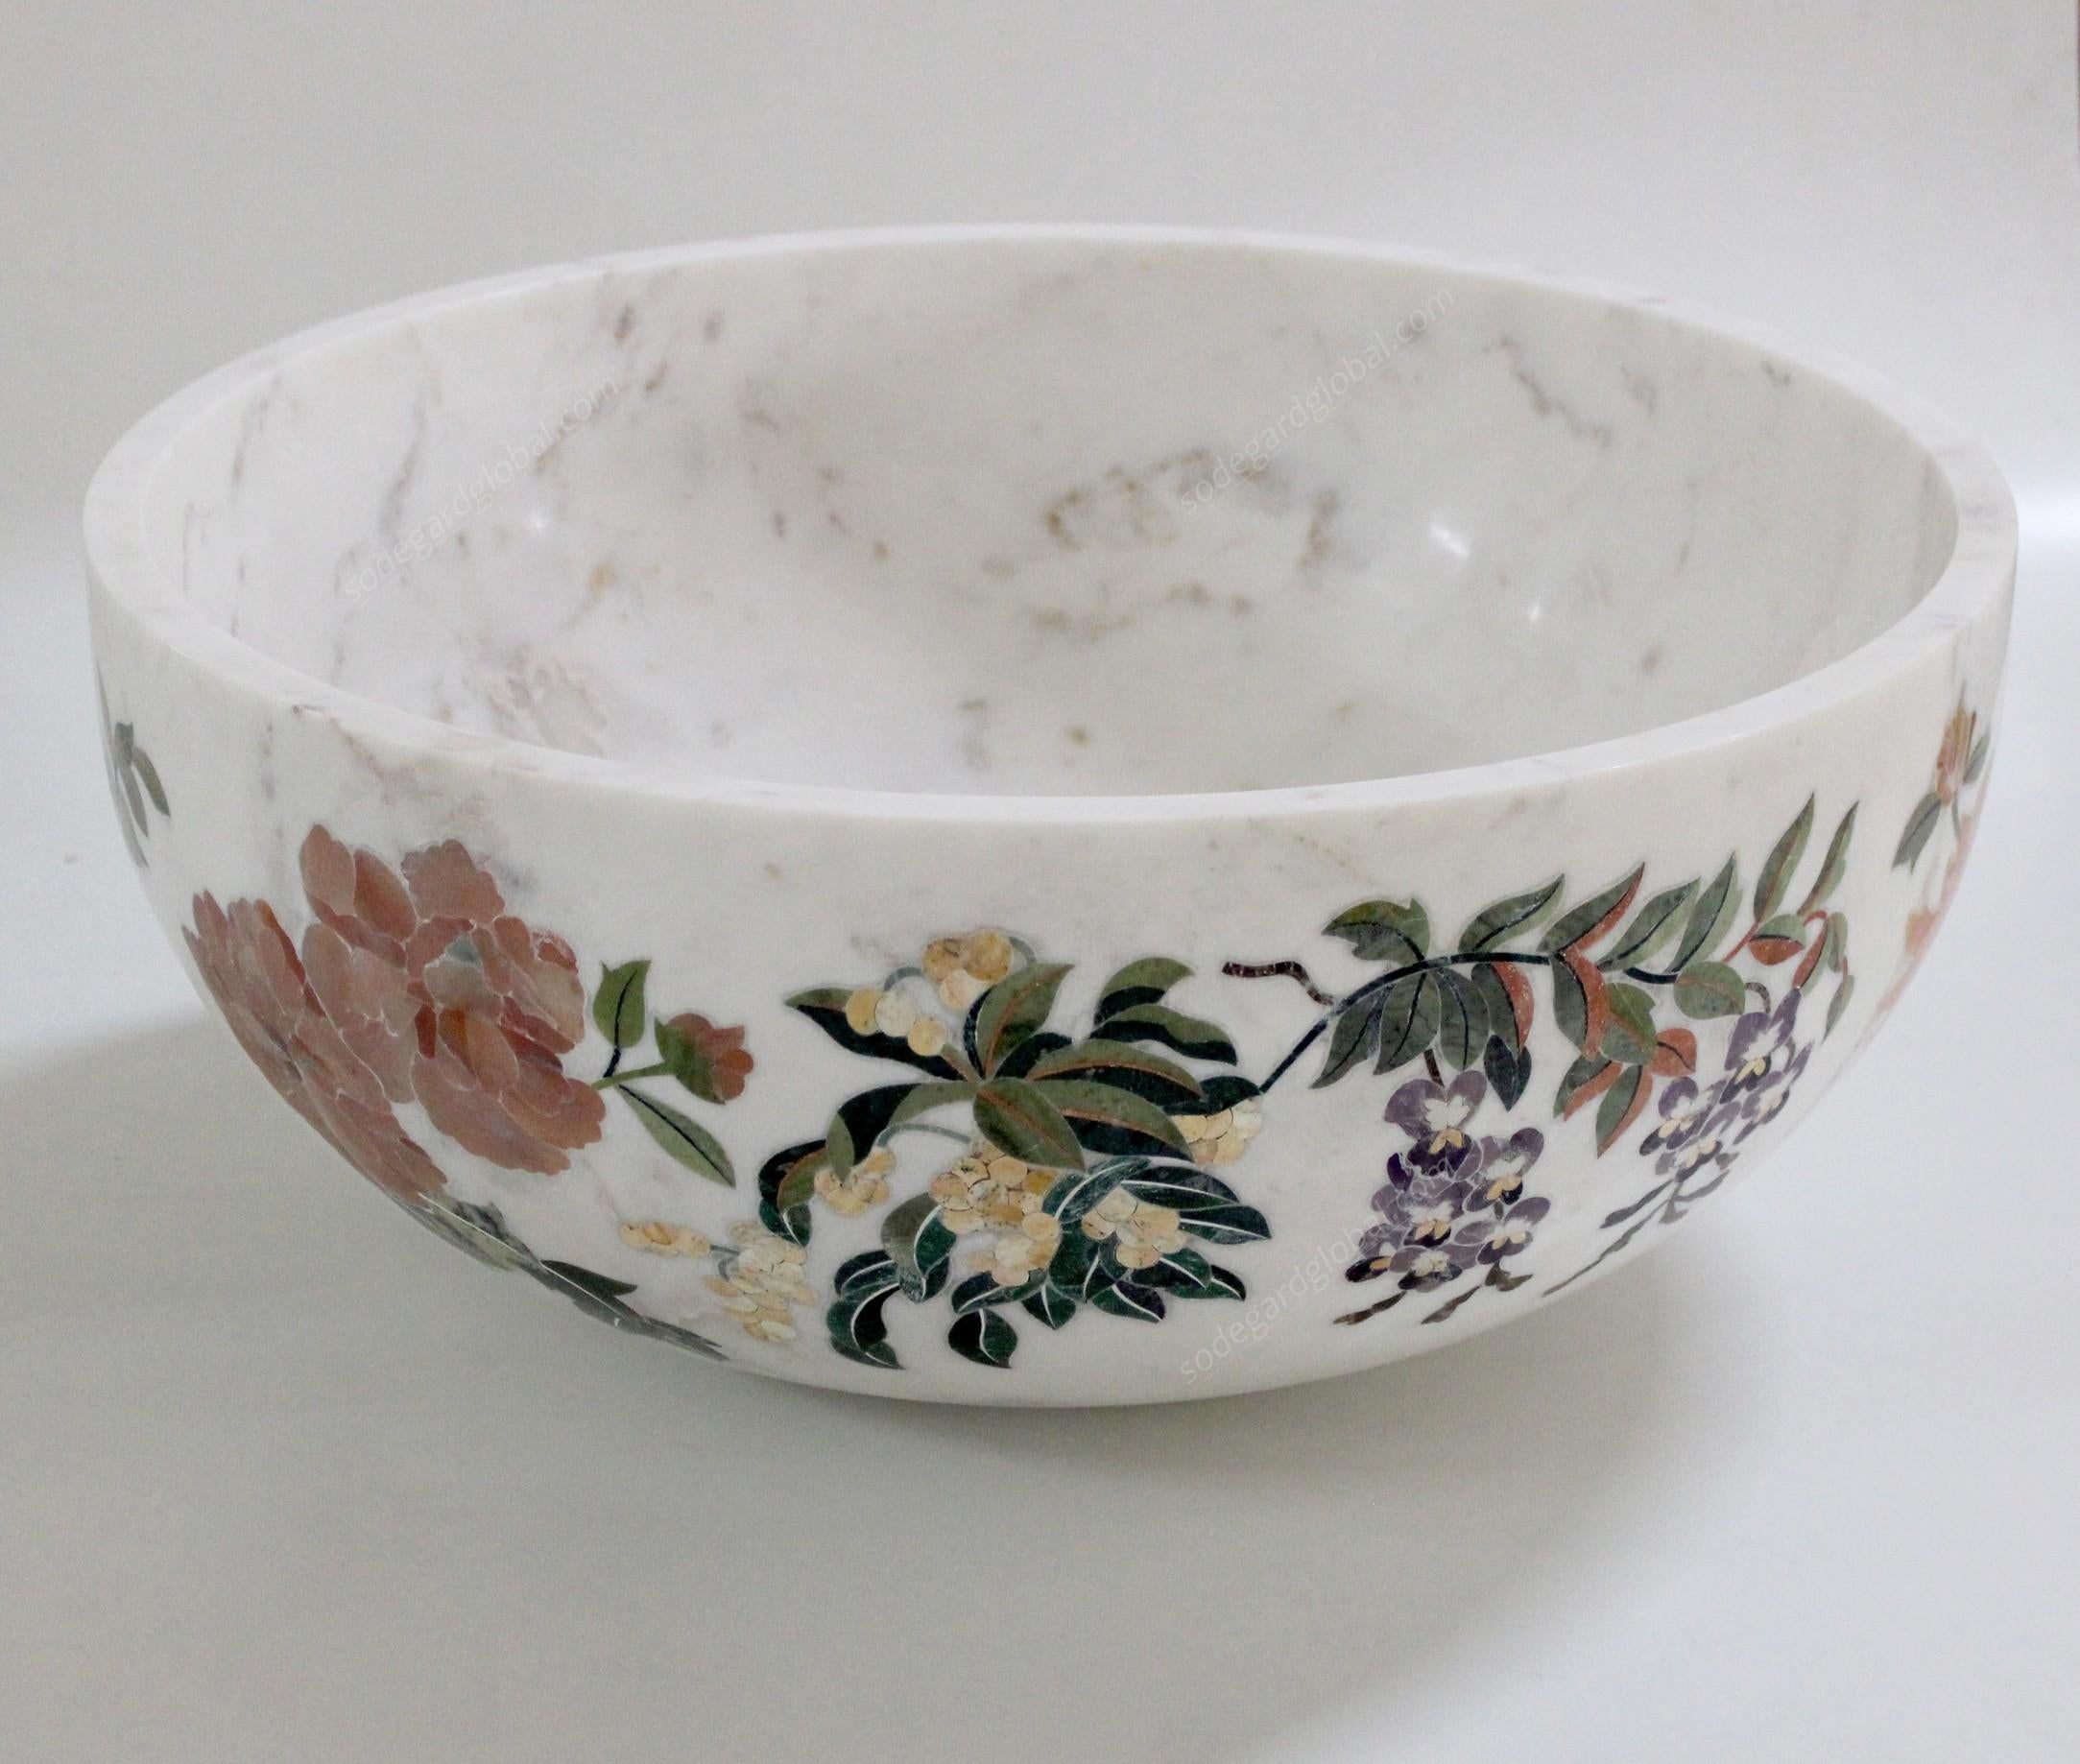 Handmade Ornamenti Bowl Inlay in White Marble by Stephanie Odegard For Sale 4